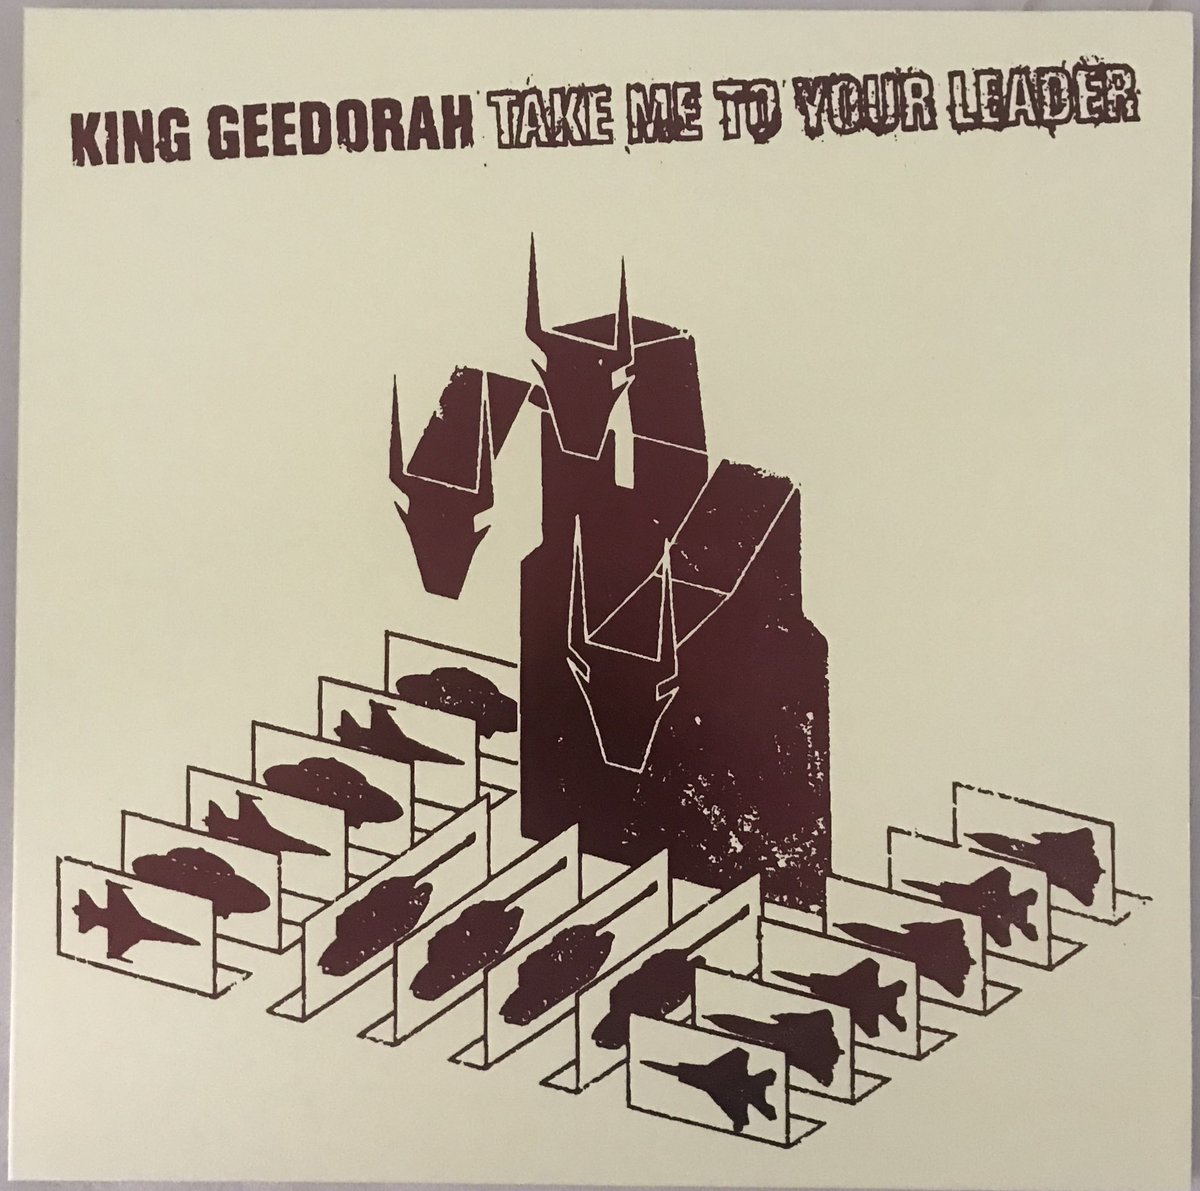 King Geedorah - Take Me To Your LeaderIncludes:Take Me To Your Leader (2xLP) - Red VinylDetachable PartsRating: 9/10